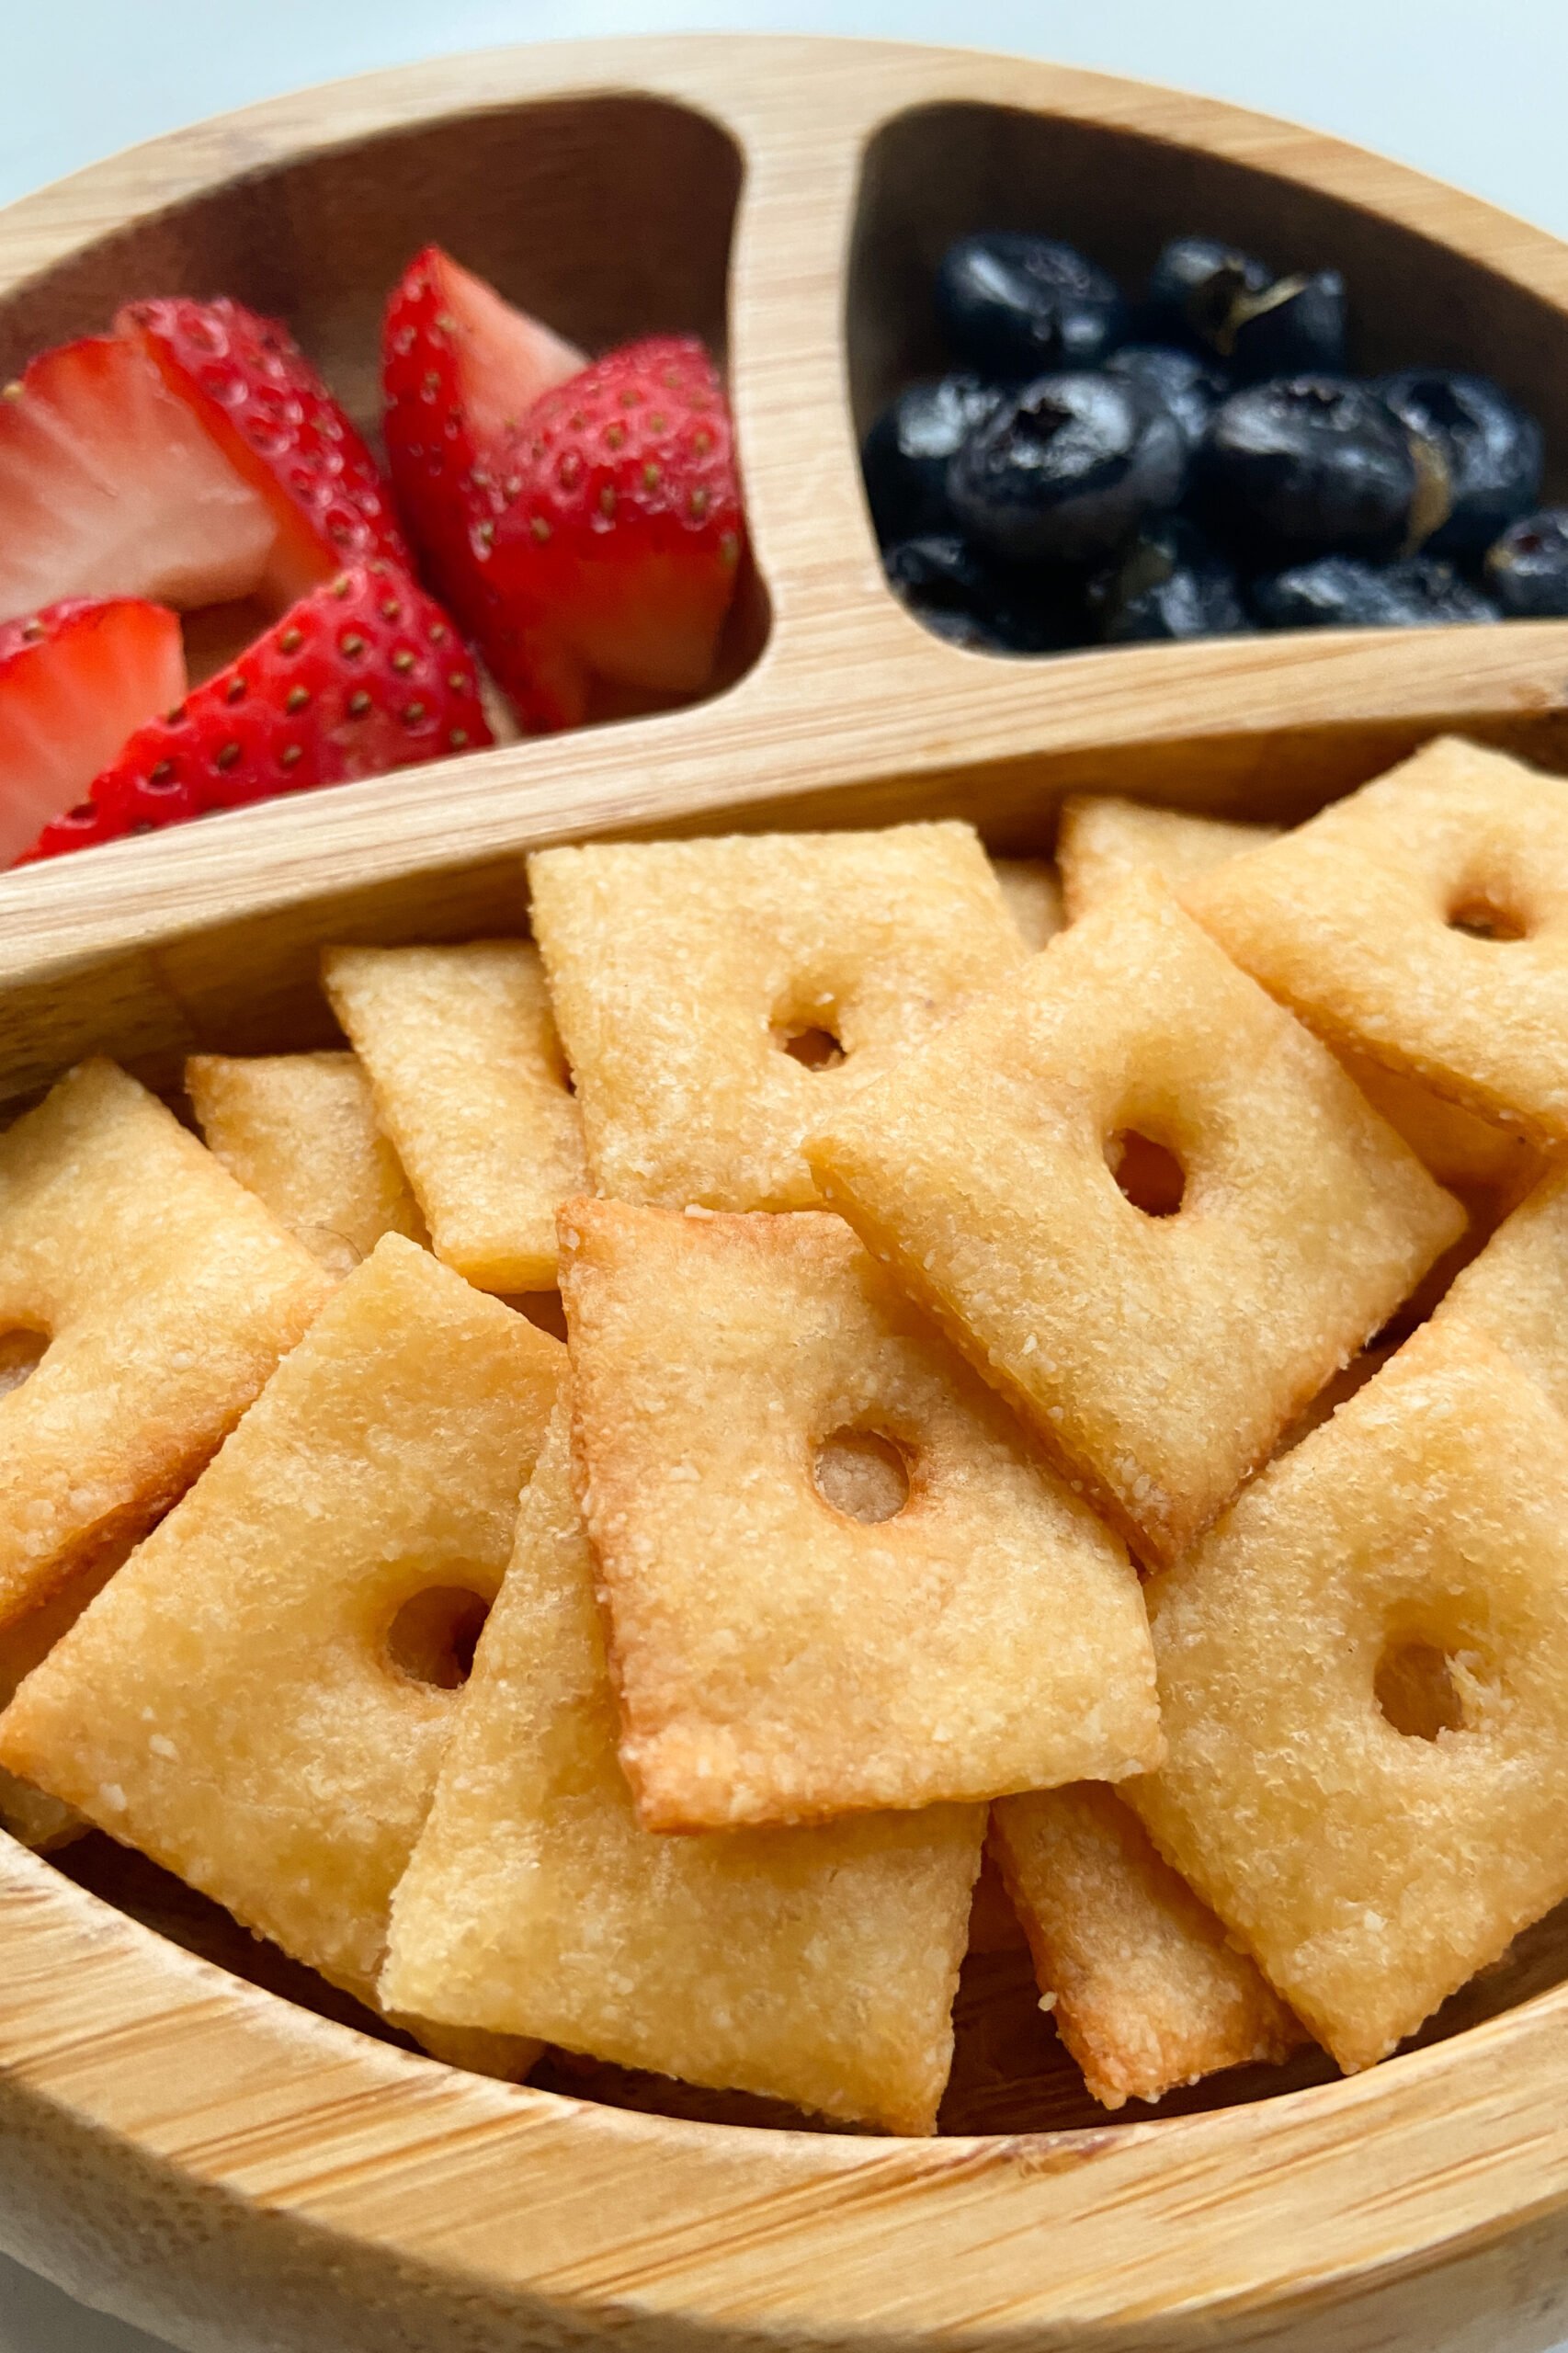 Homemade cheez-it crackers served with strawberries and blueberries